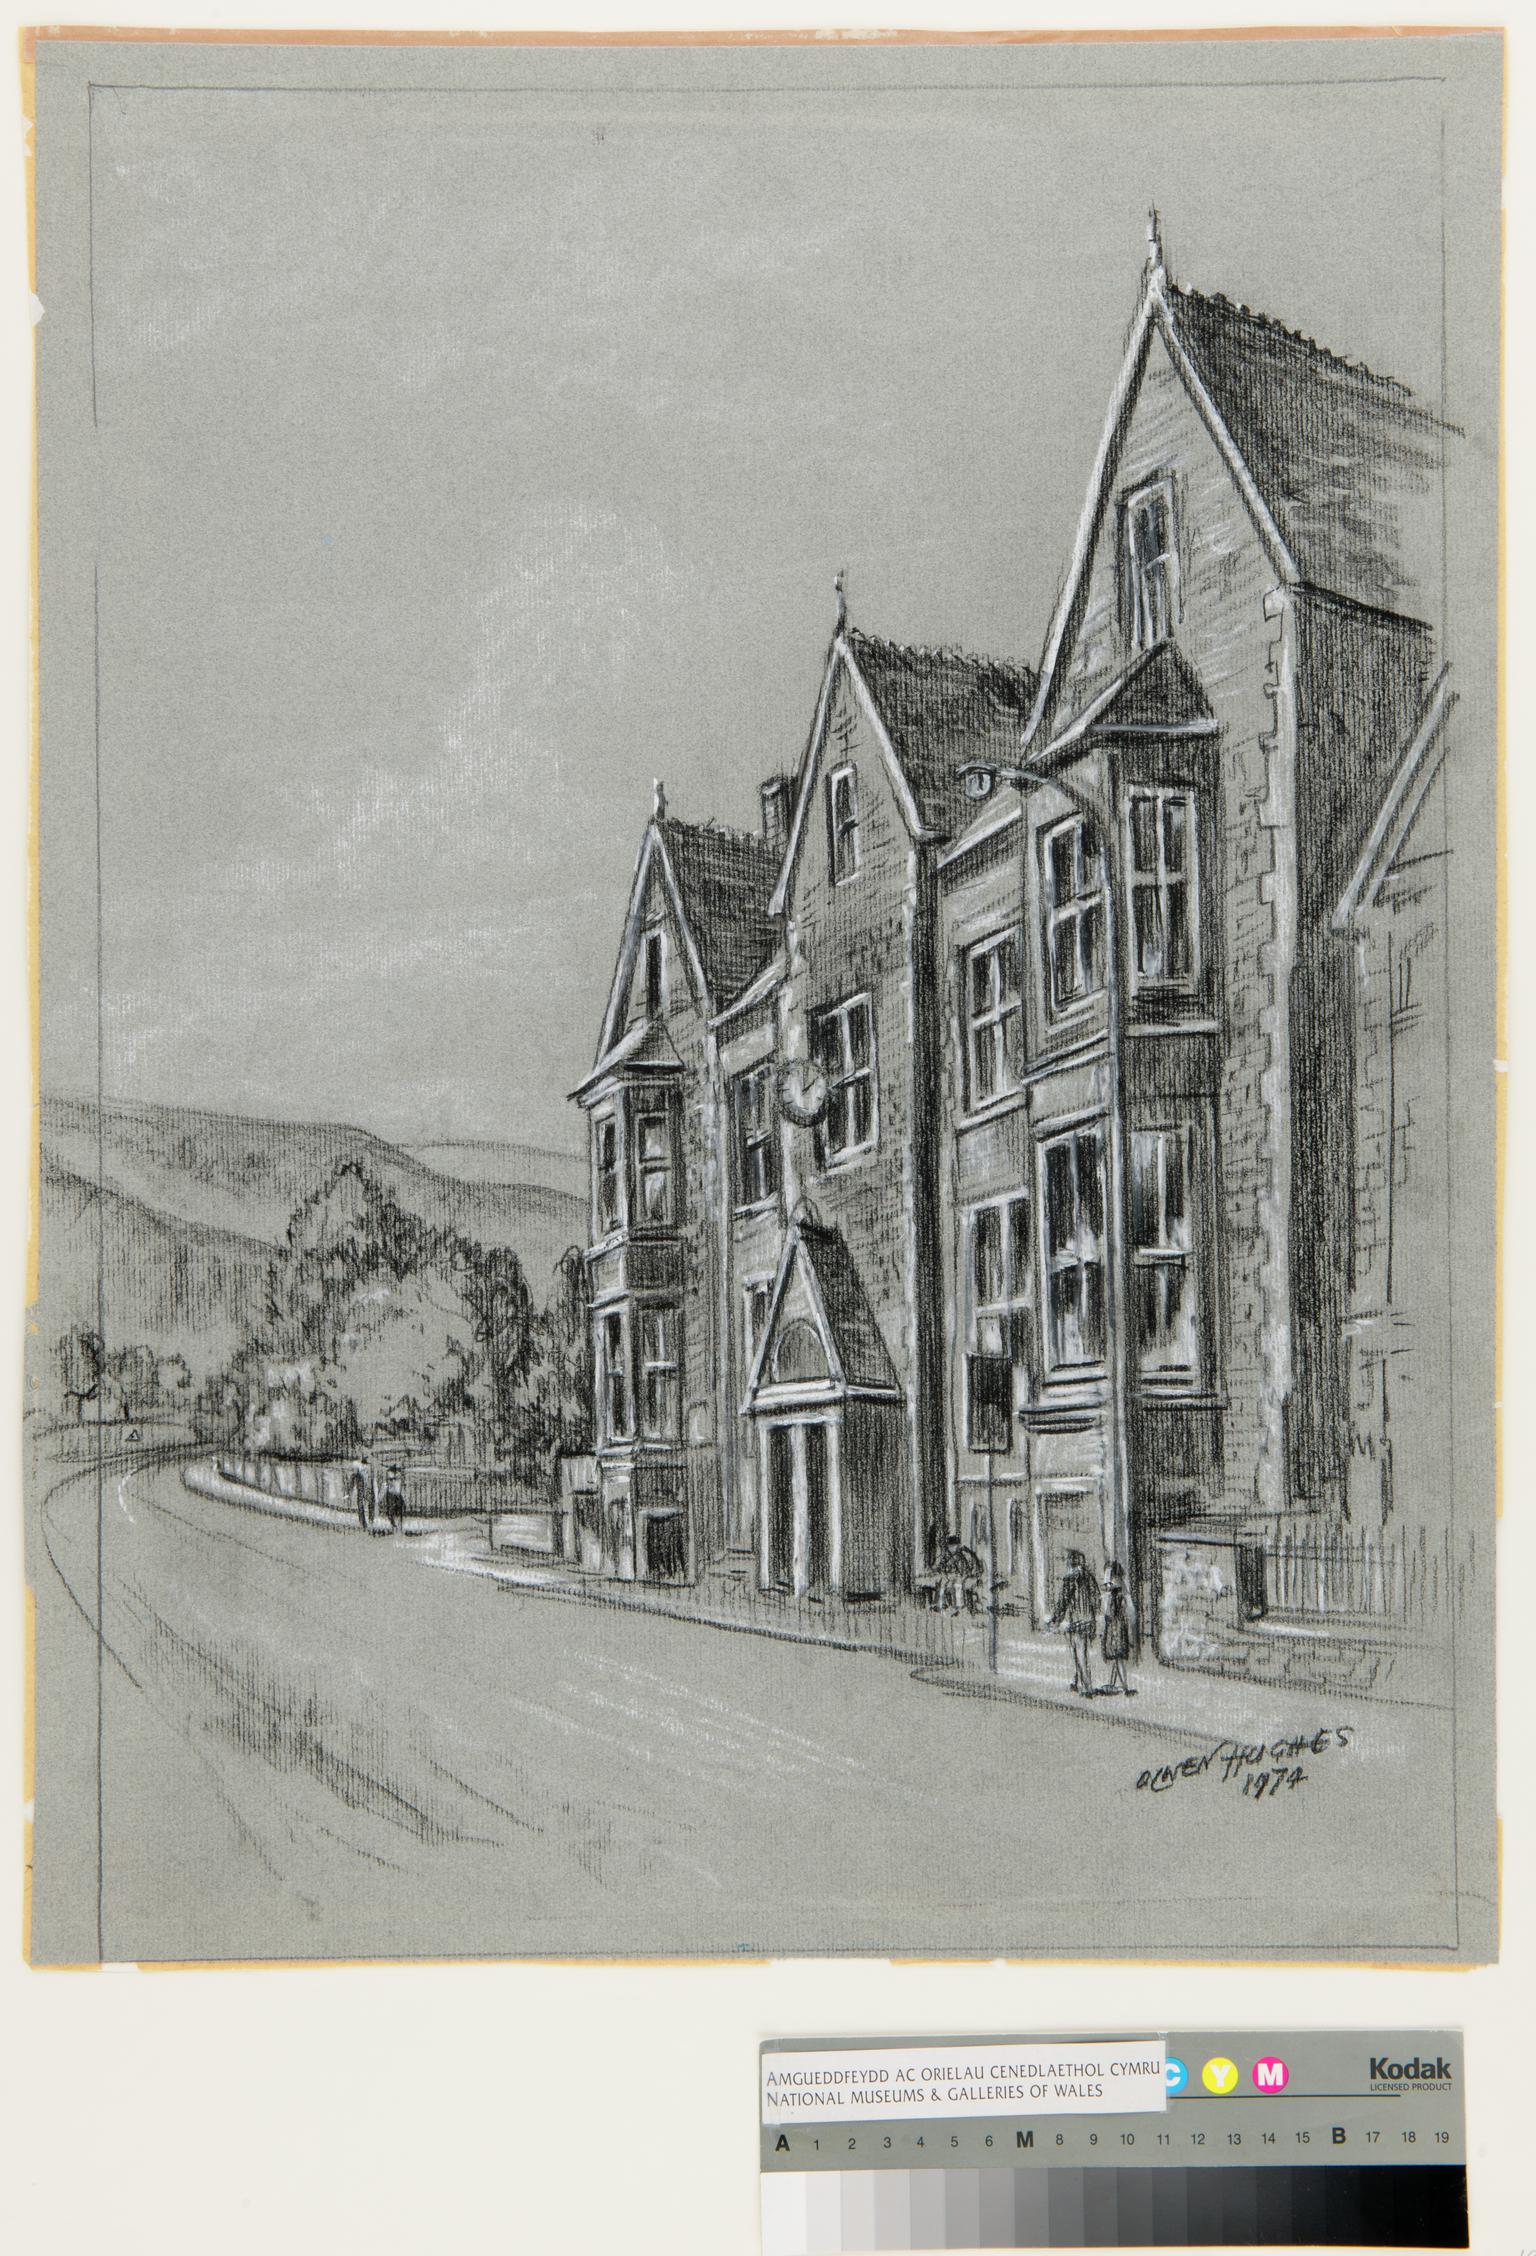 Unidentified town building, charcoal drawing